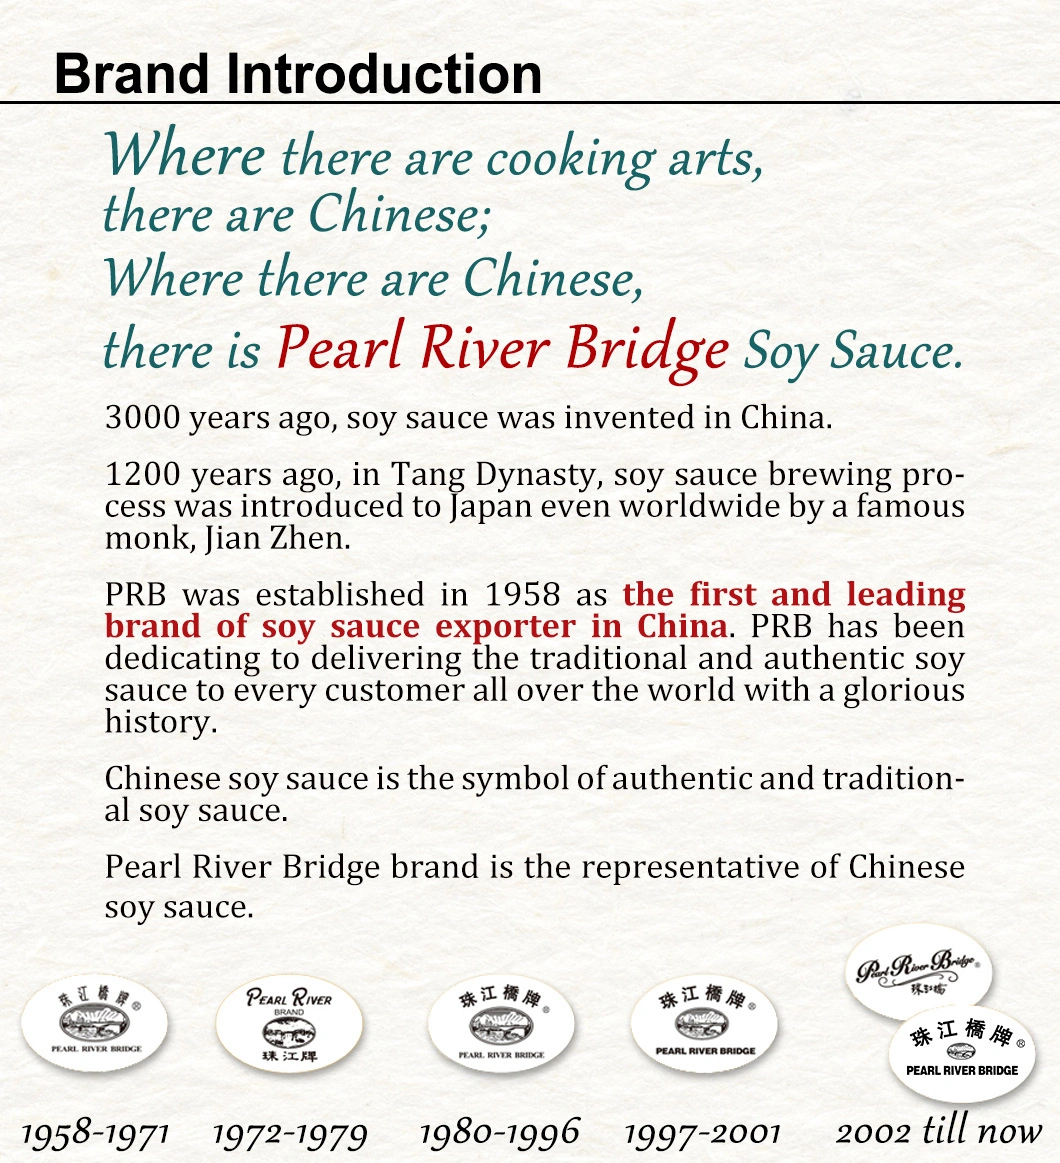 Pearl River Bridge Premium Lite Soy Sauce Reduced Salt 150ml for Cooking Cuisine with Factory Price